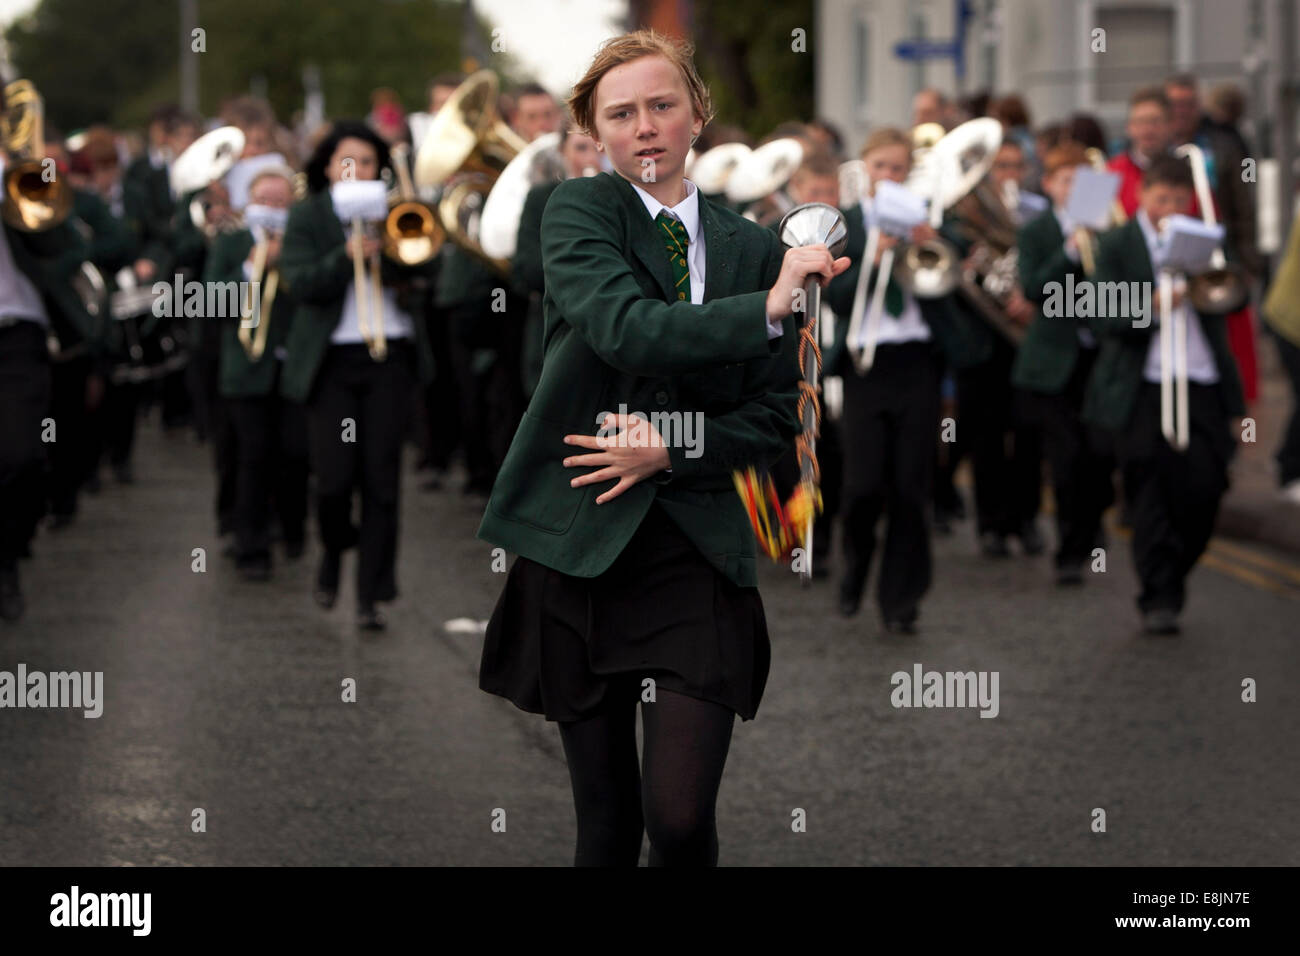 picture by Chris Bull  11/06/11 Bury Lions Carnival 2011 .  Wardle High School band .  www.chrisbullphotographer.com Stock Photo